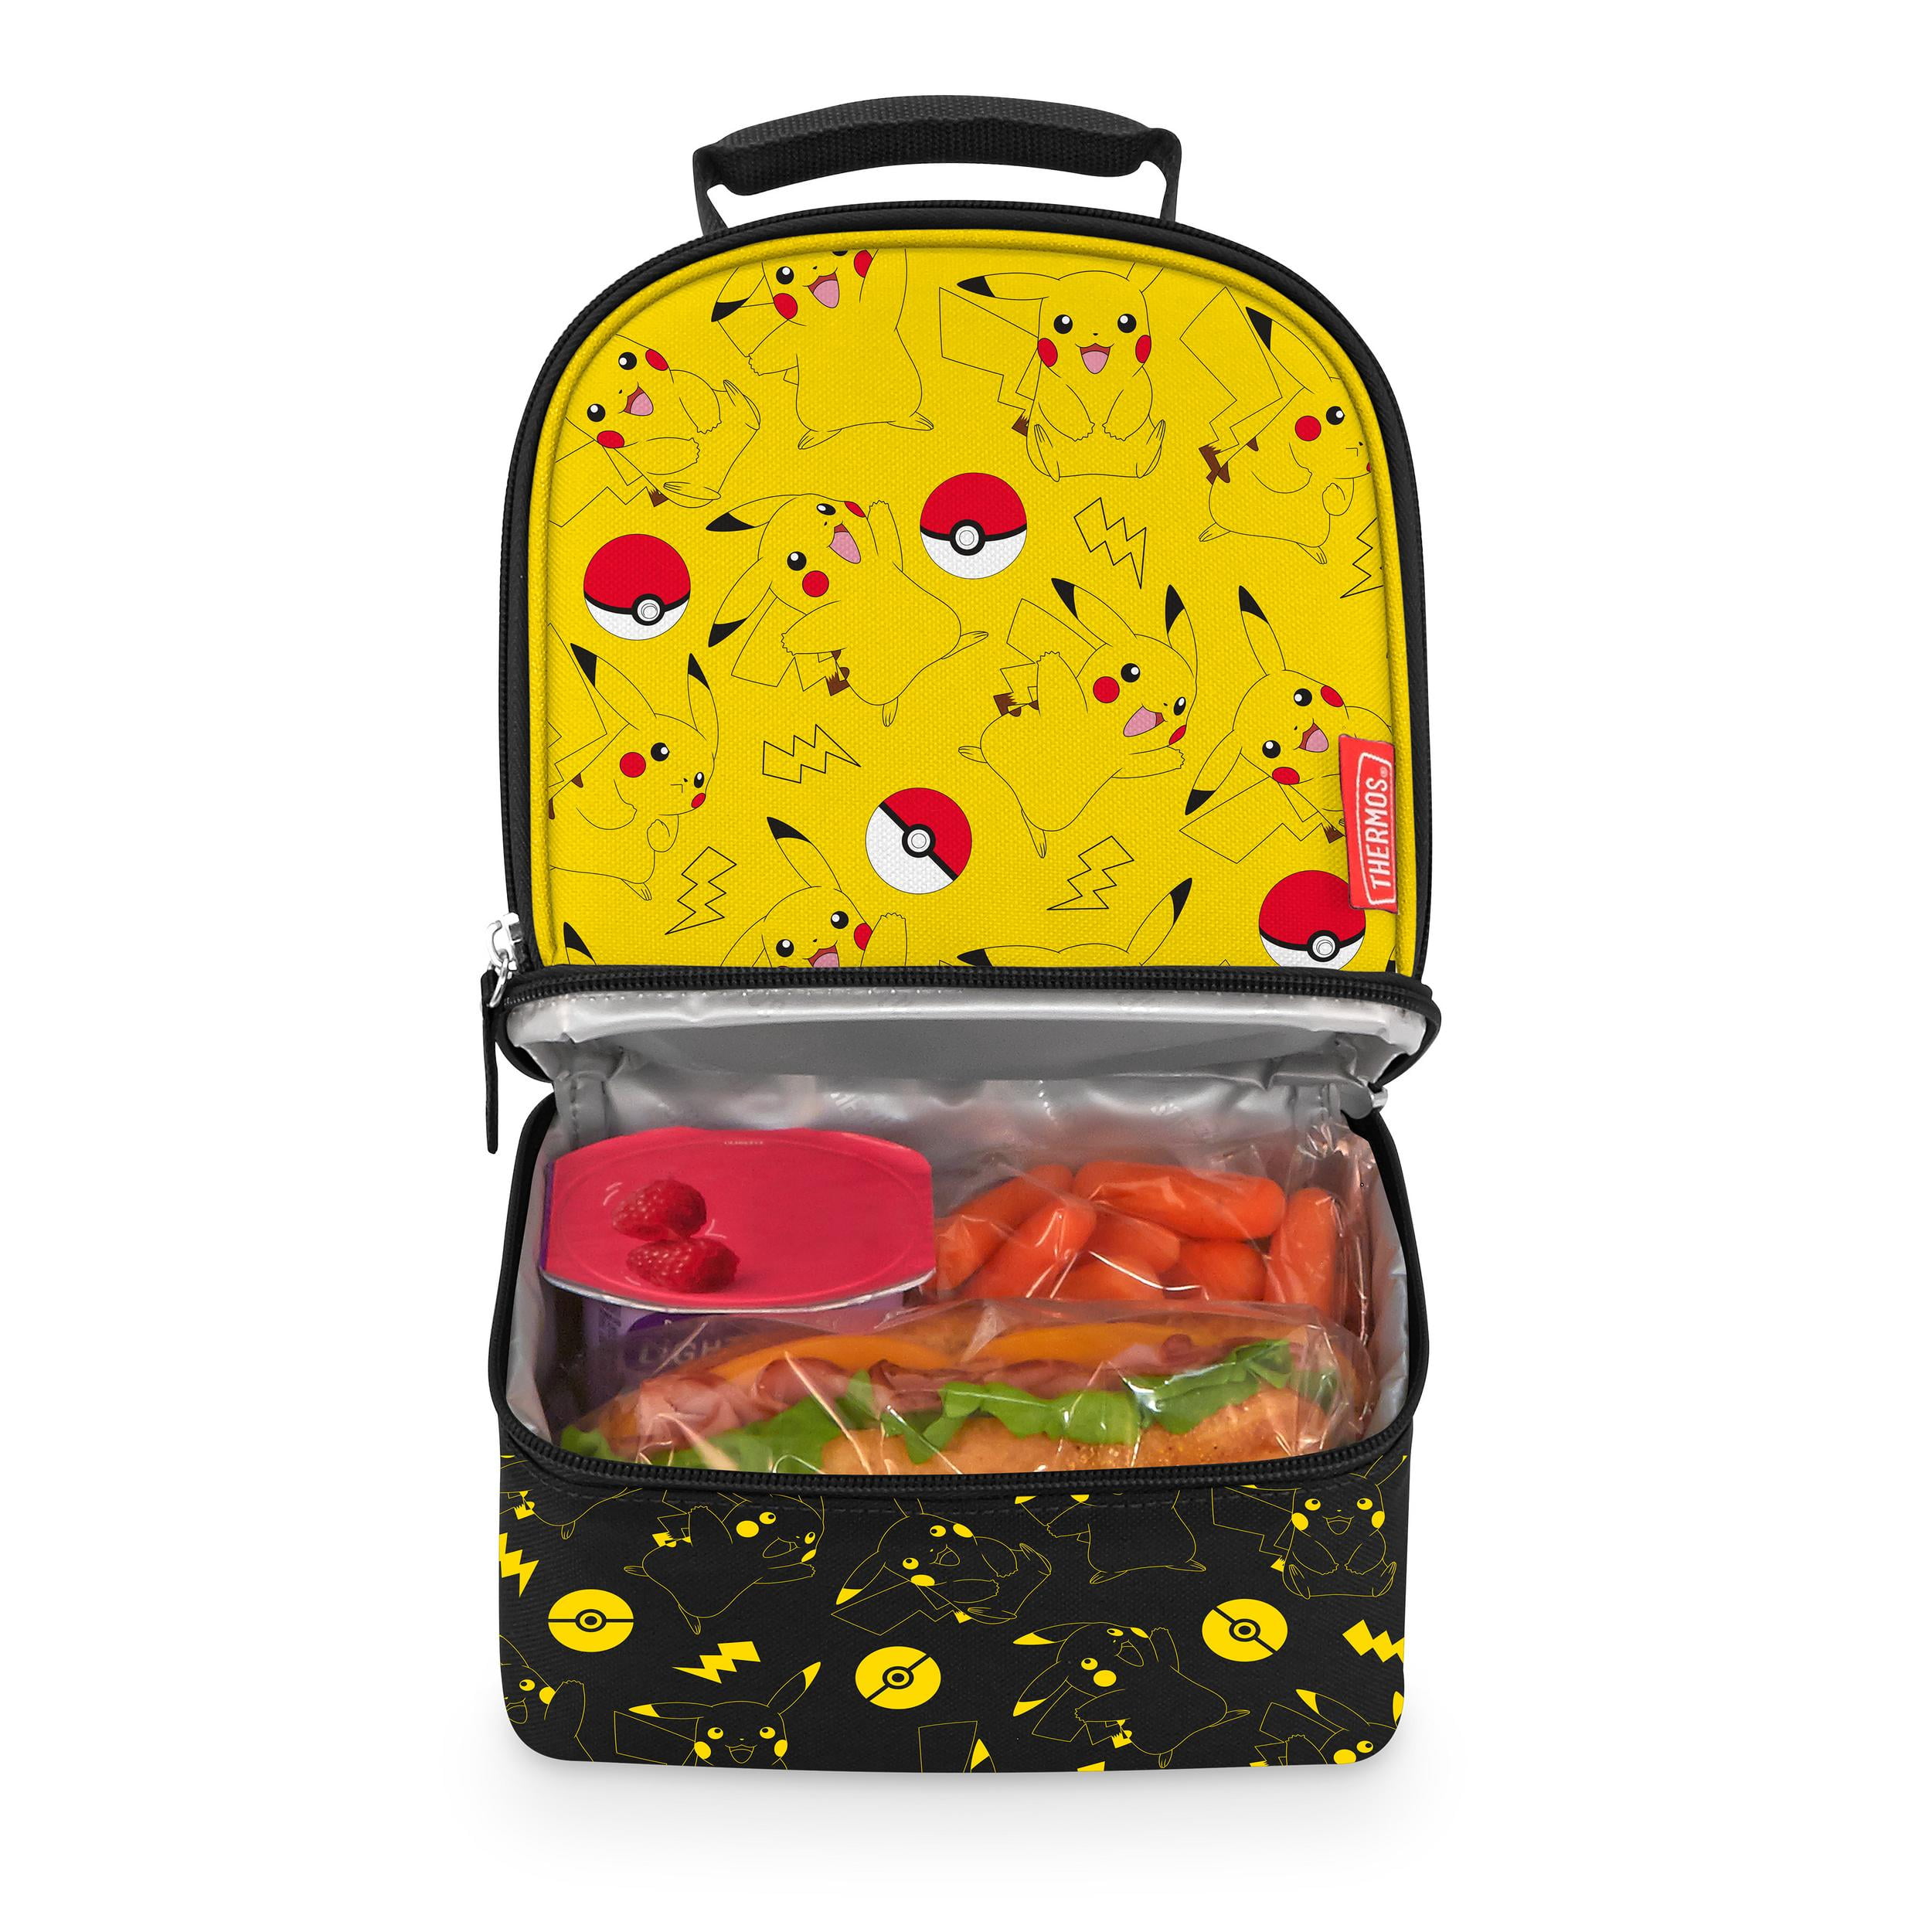 Thermos Pokémon Soft Kids' Lunch Tote with LDPE Liner - Red 1 ct